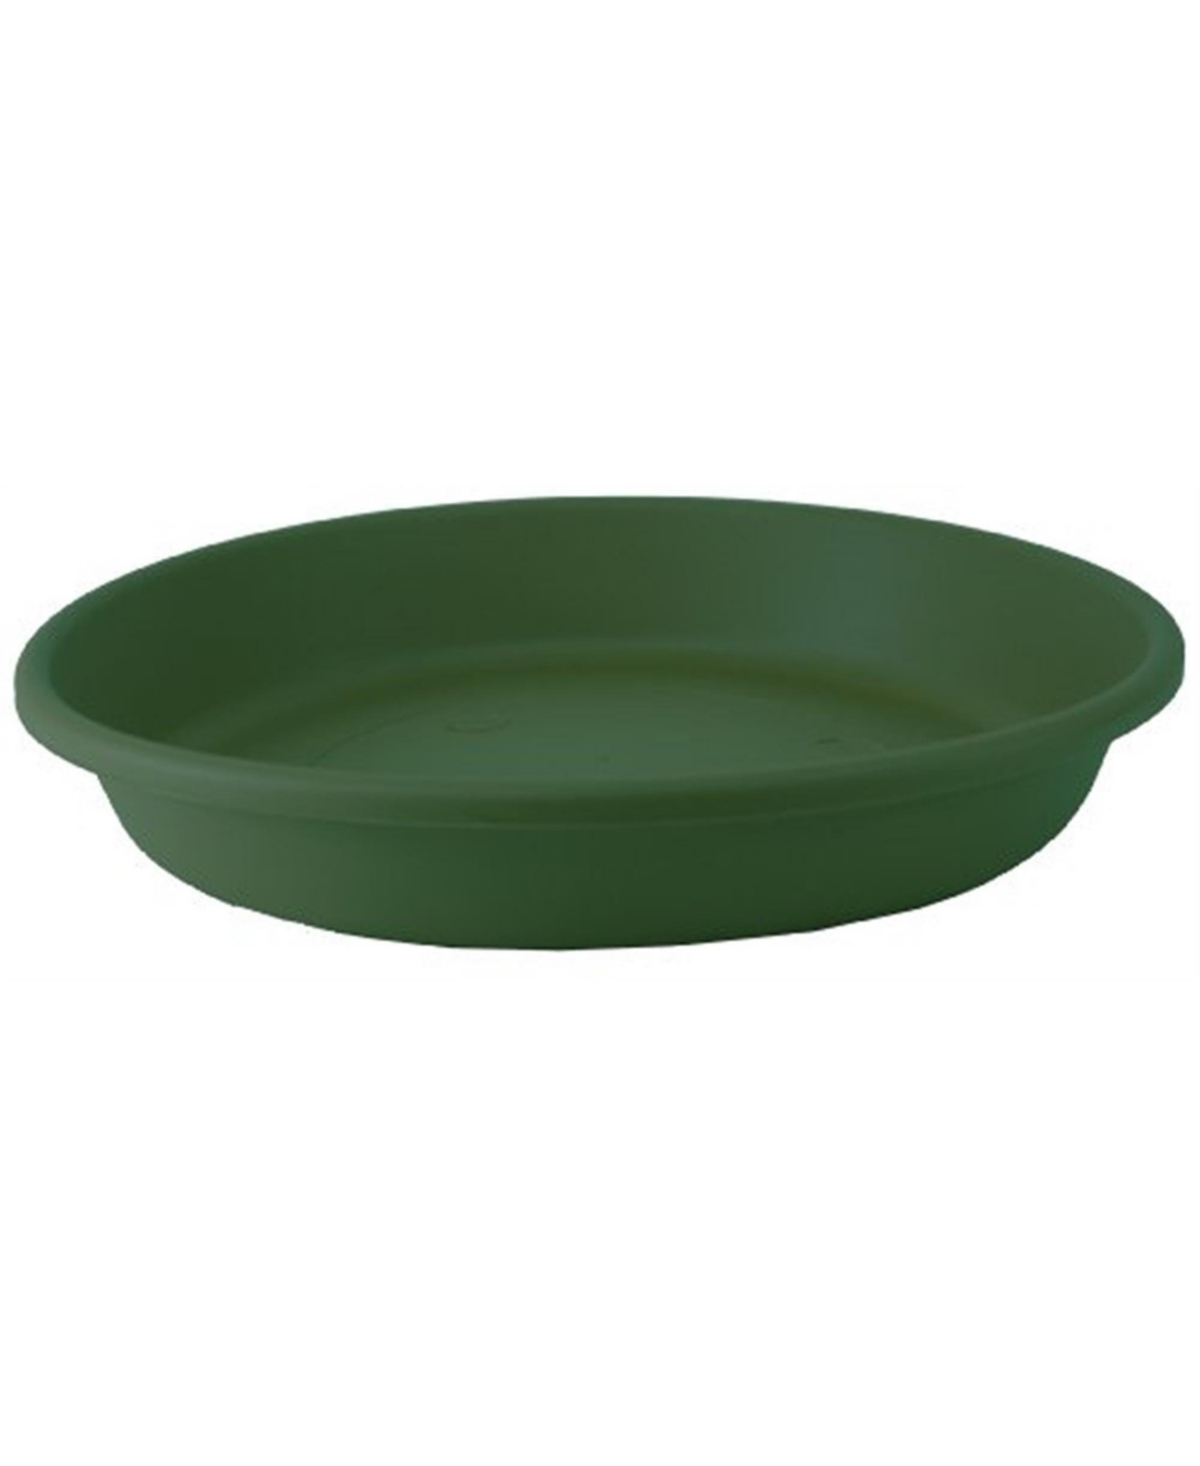 The Hc Companies Classic Saucer for 14 Inches Pot, Evergreen - Green